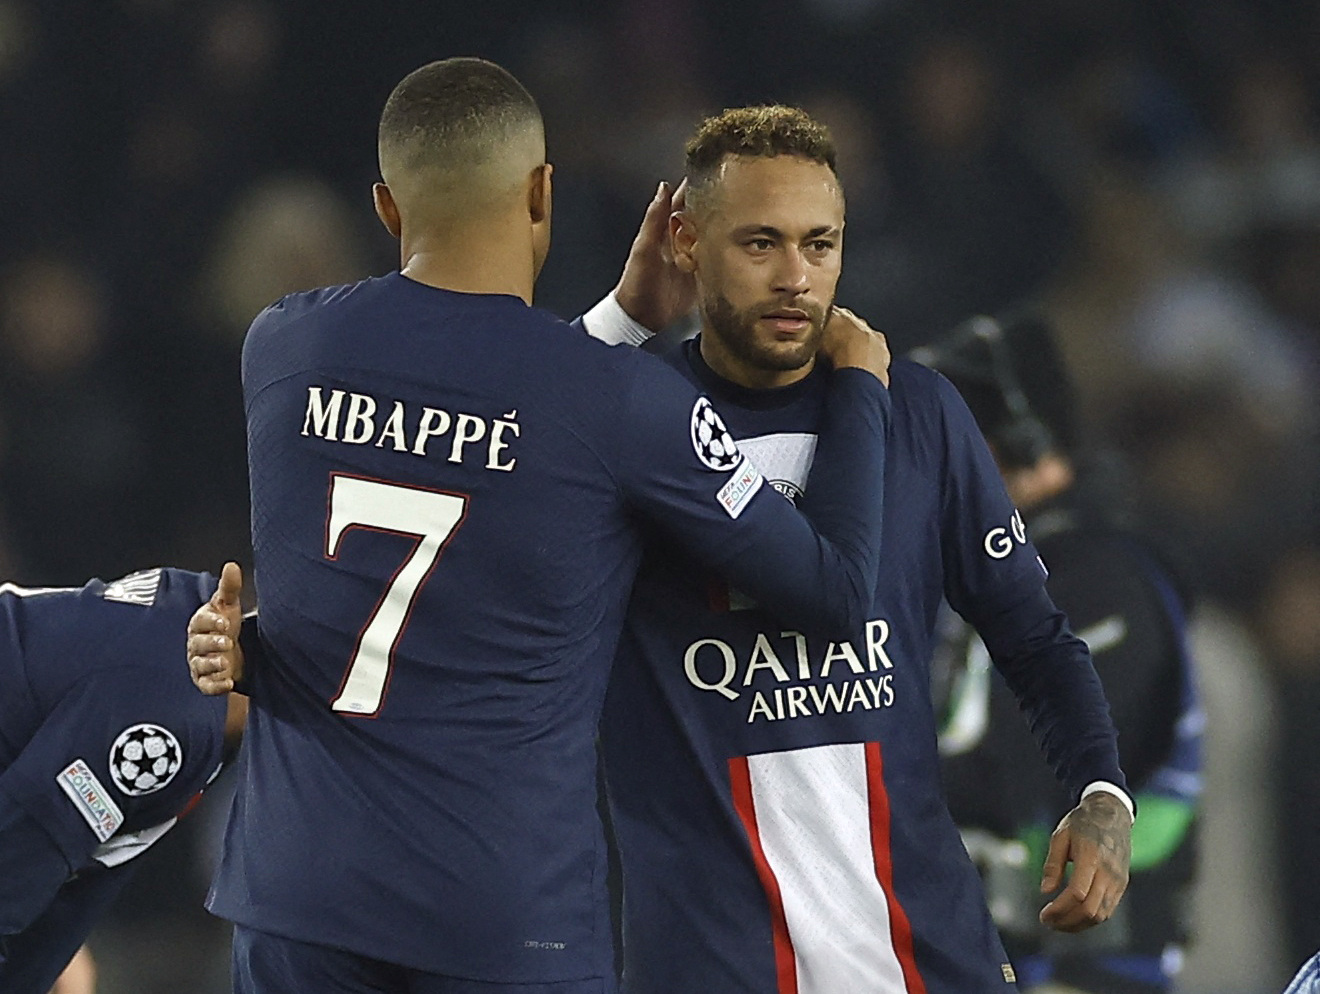 Neymar and Mbappé's Steamy Night Out